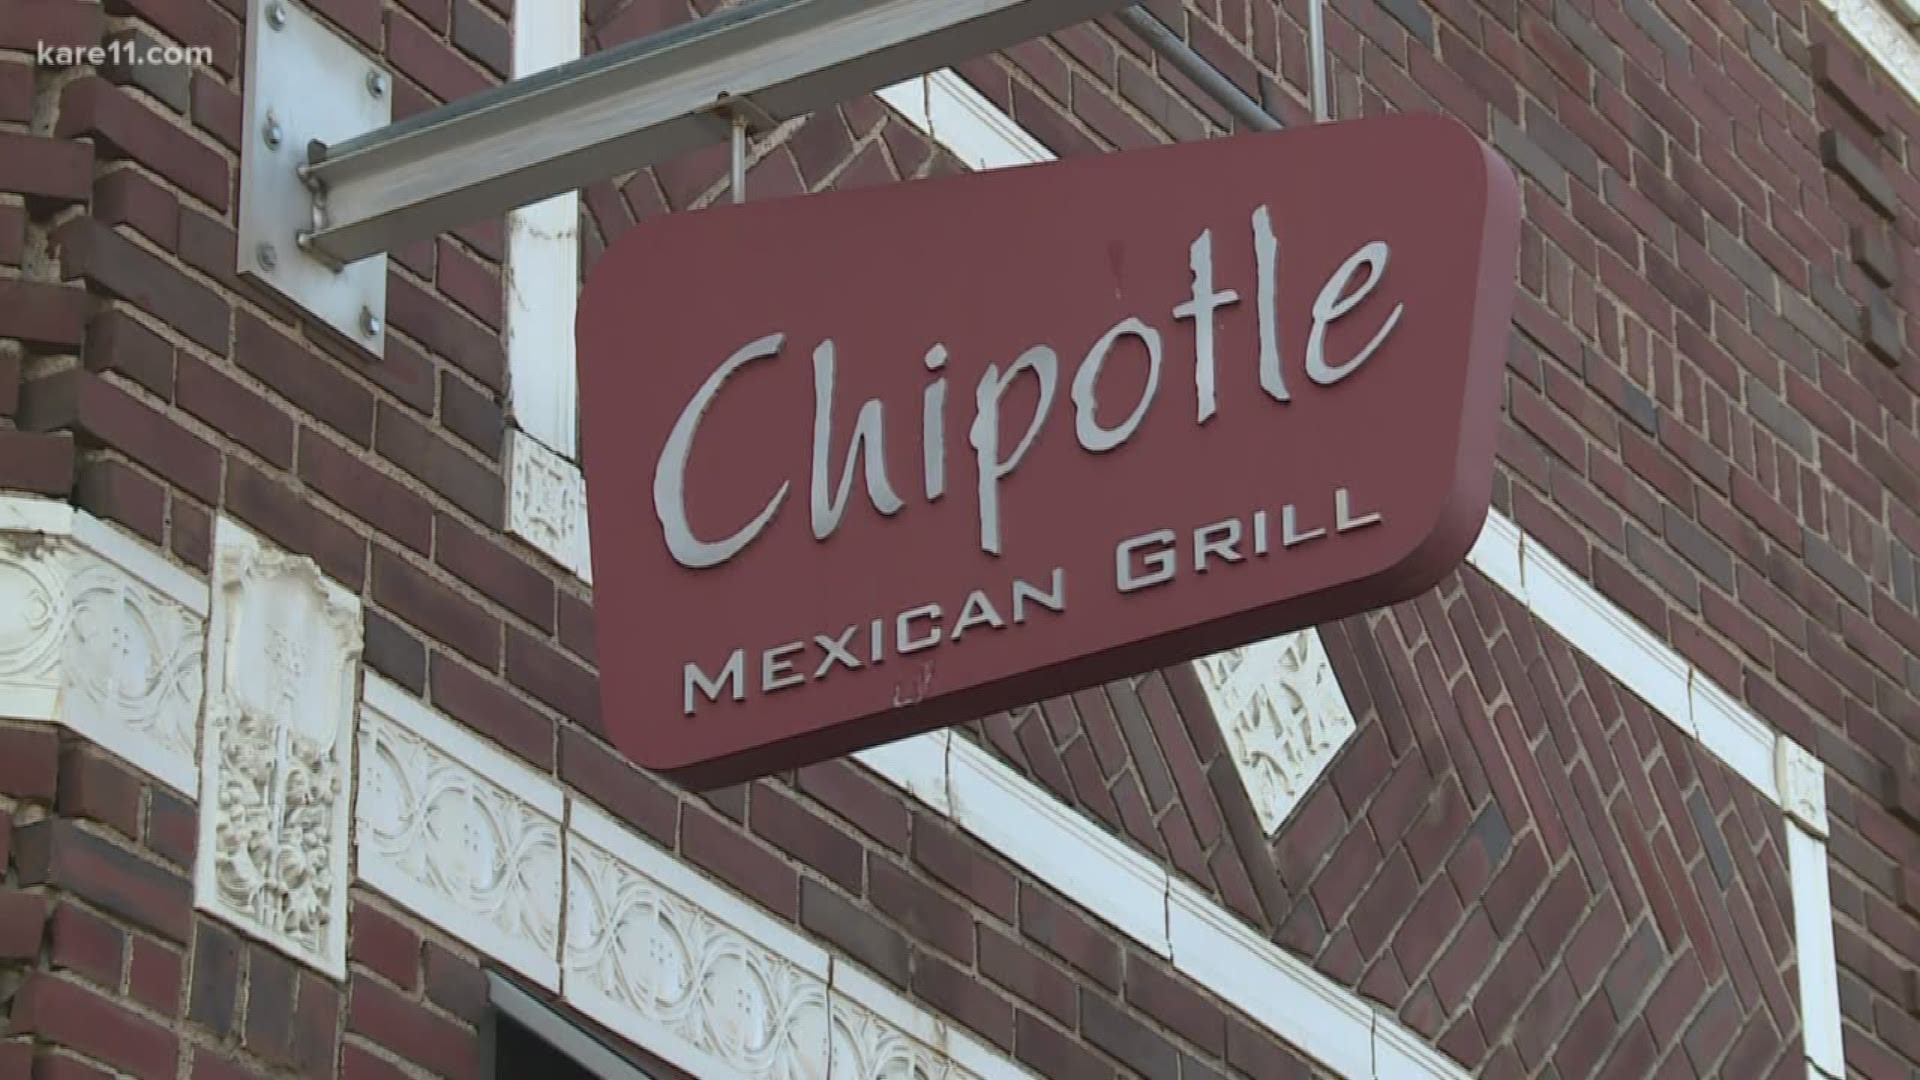 Employees accused the men of being repeat dine-and-dashers. One of the men, 21-year-old Masud Ali, posted a video of the incident on Twitter, alleging that he and his friends were subjected to racial stereotyping.
https://kare11.tv/2Fw49d8